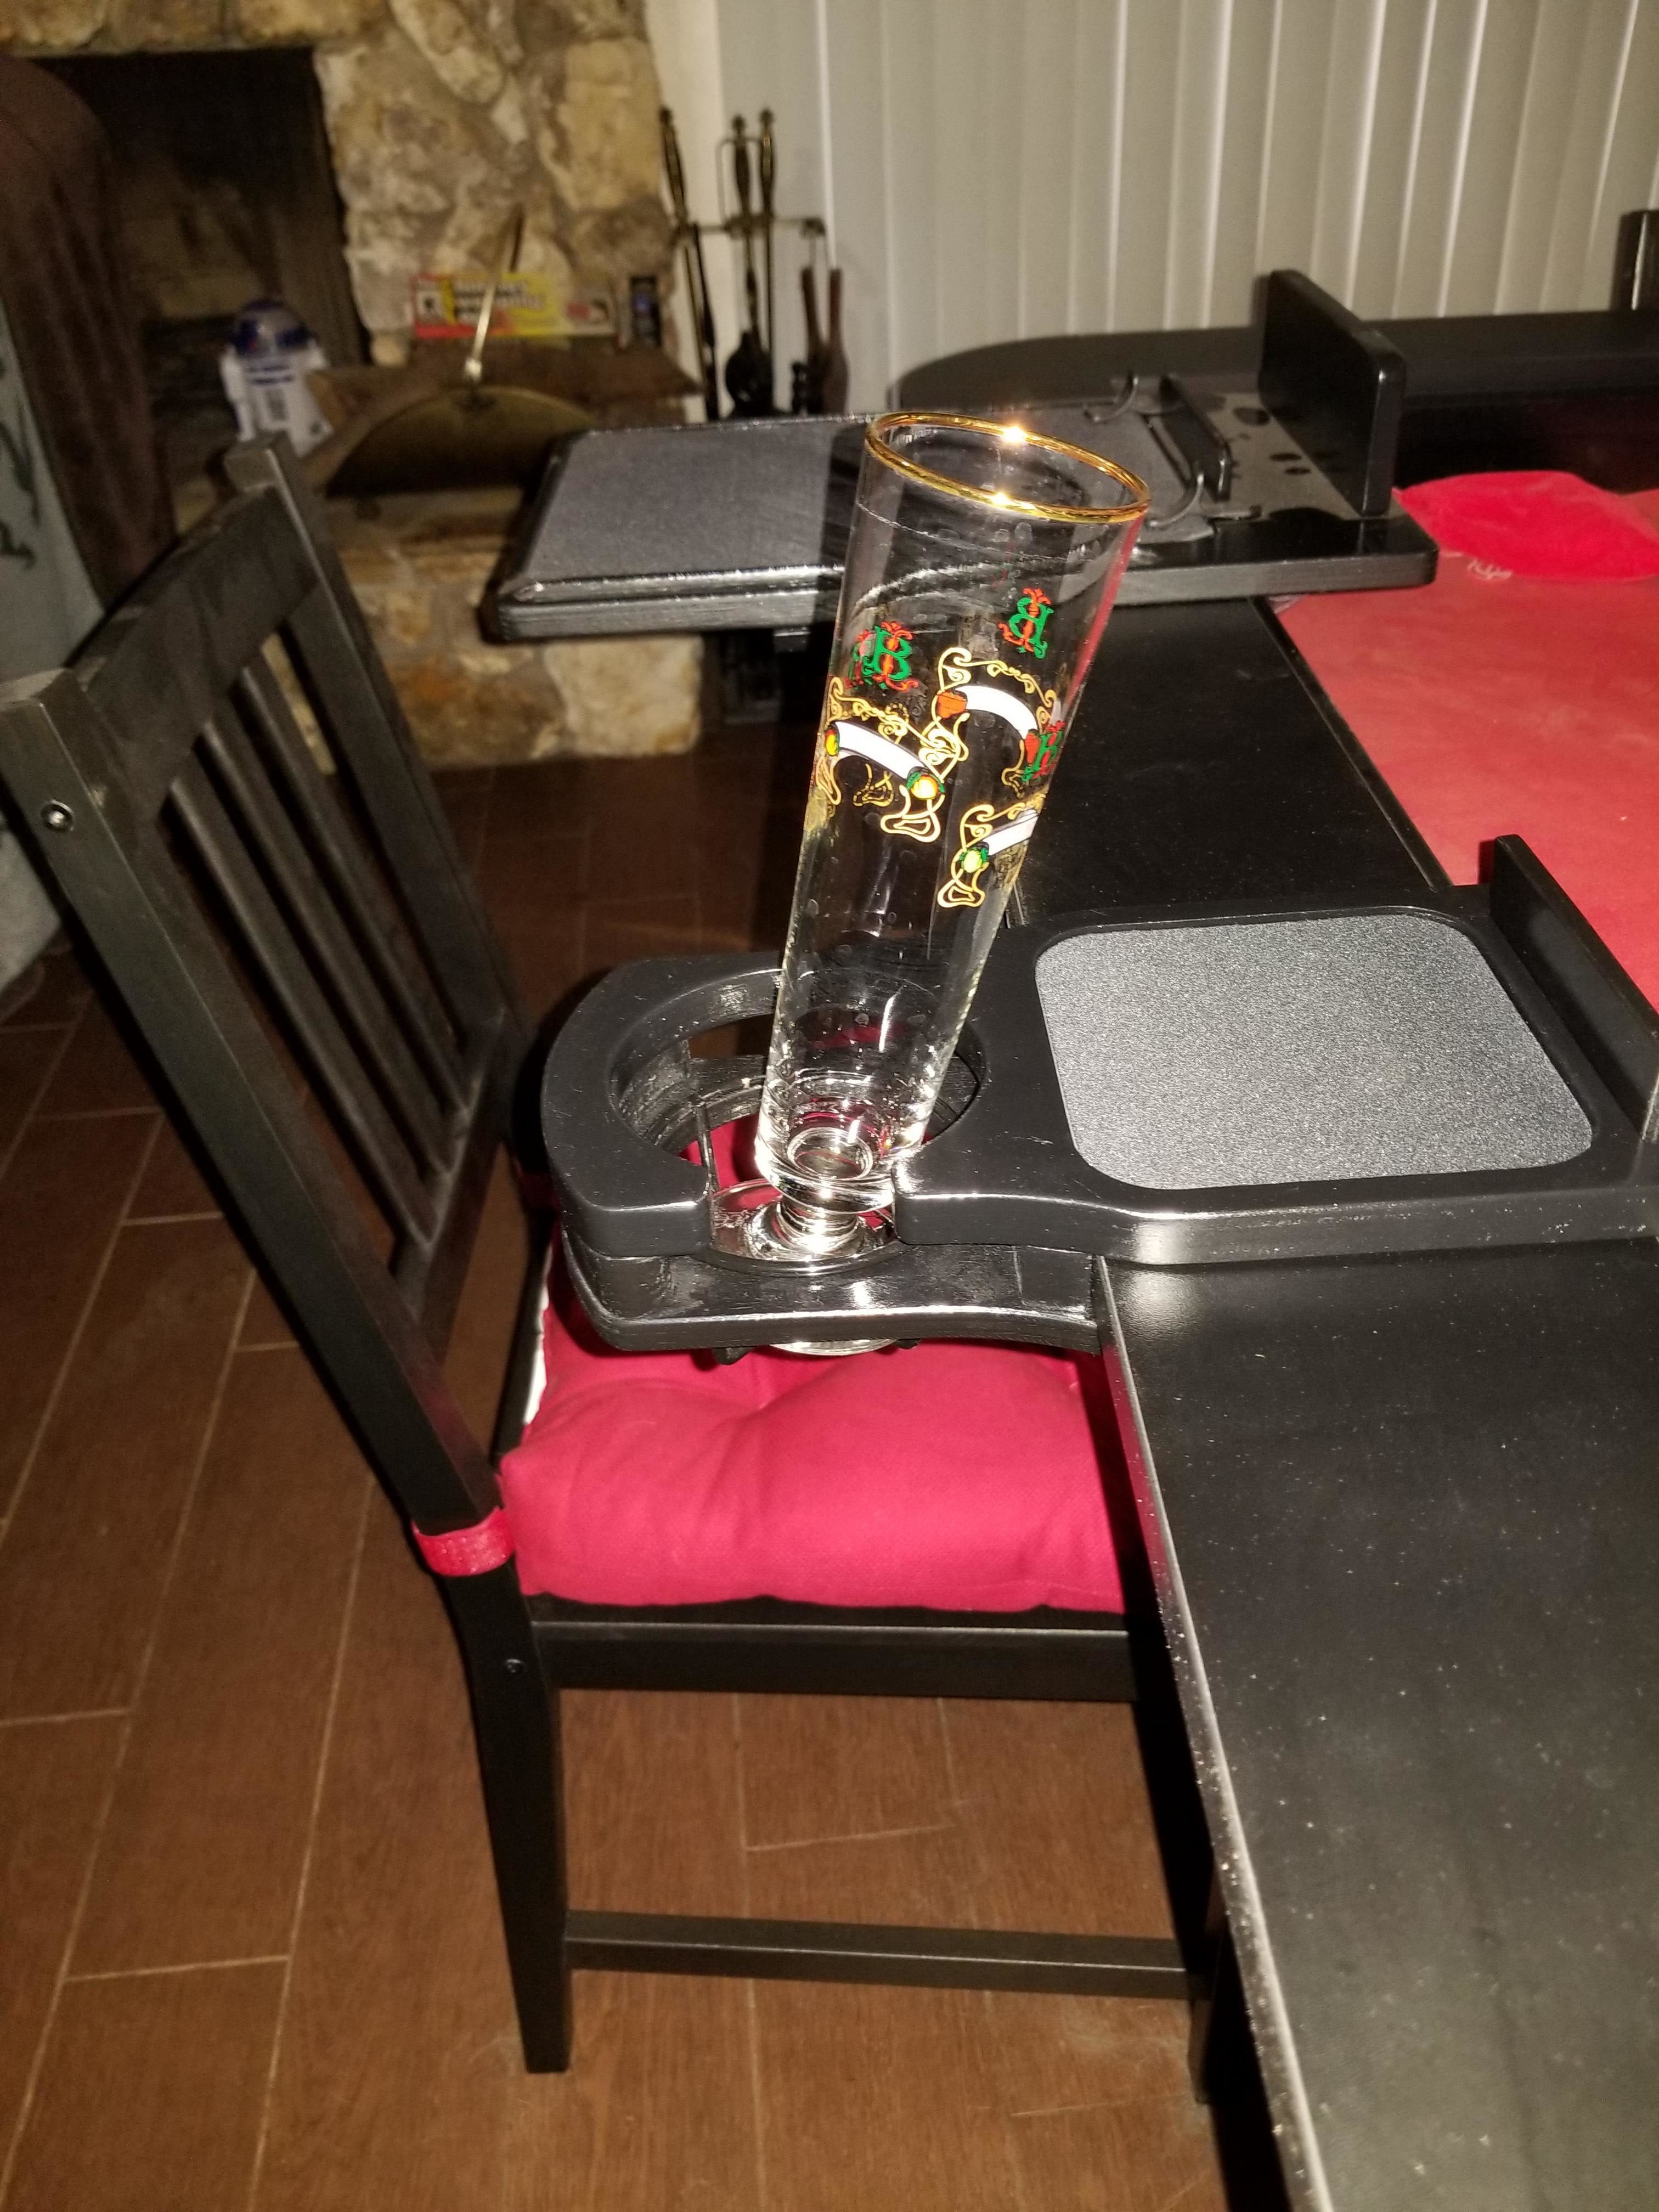 Is TableCoaster the ultimate anti-spill drink holder? - The Gadgeteer